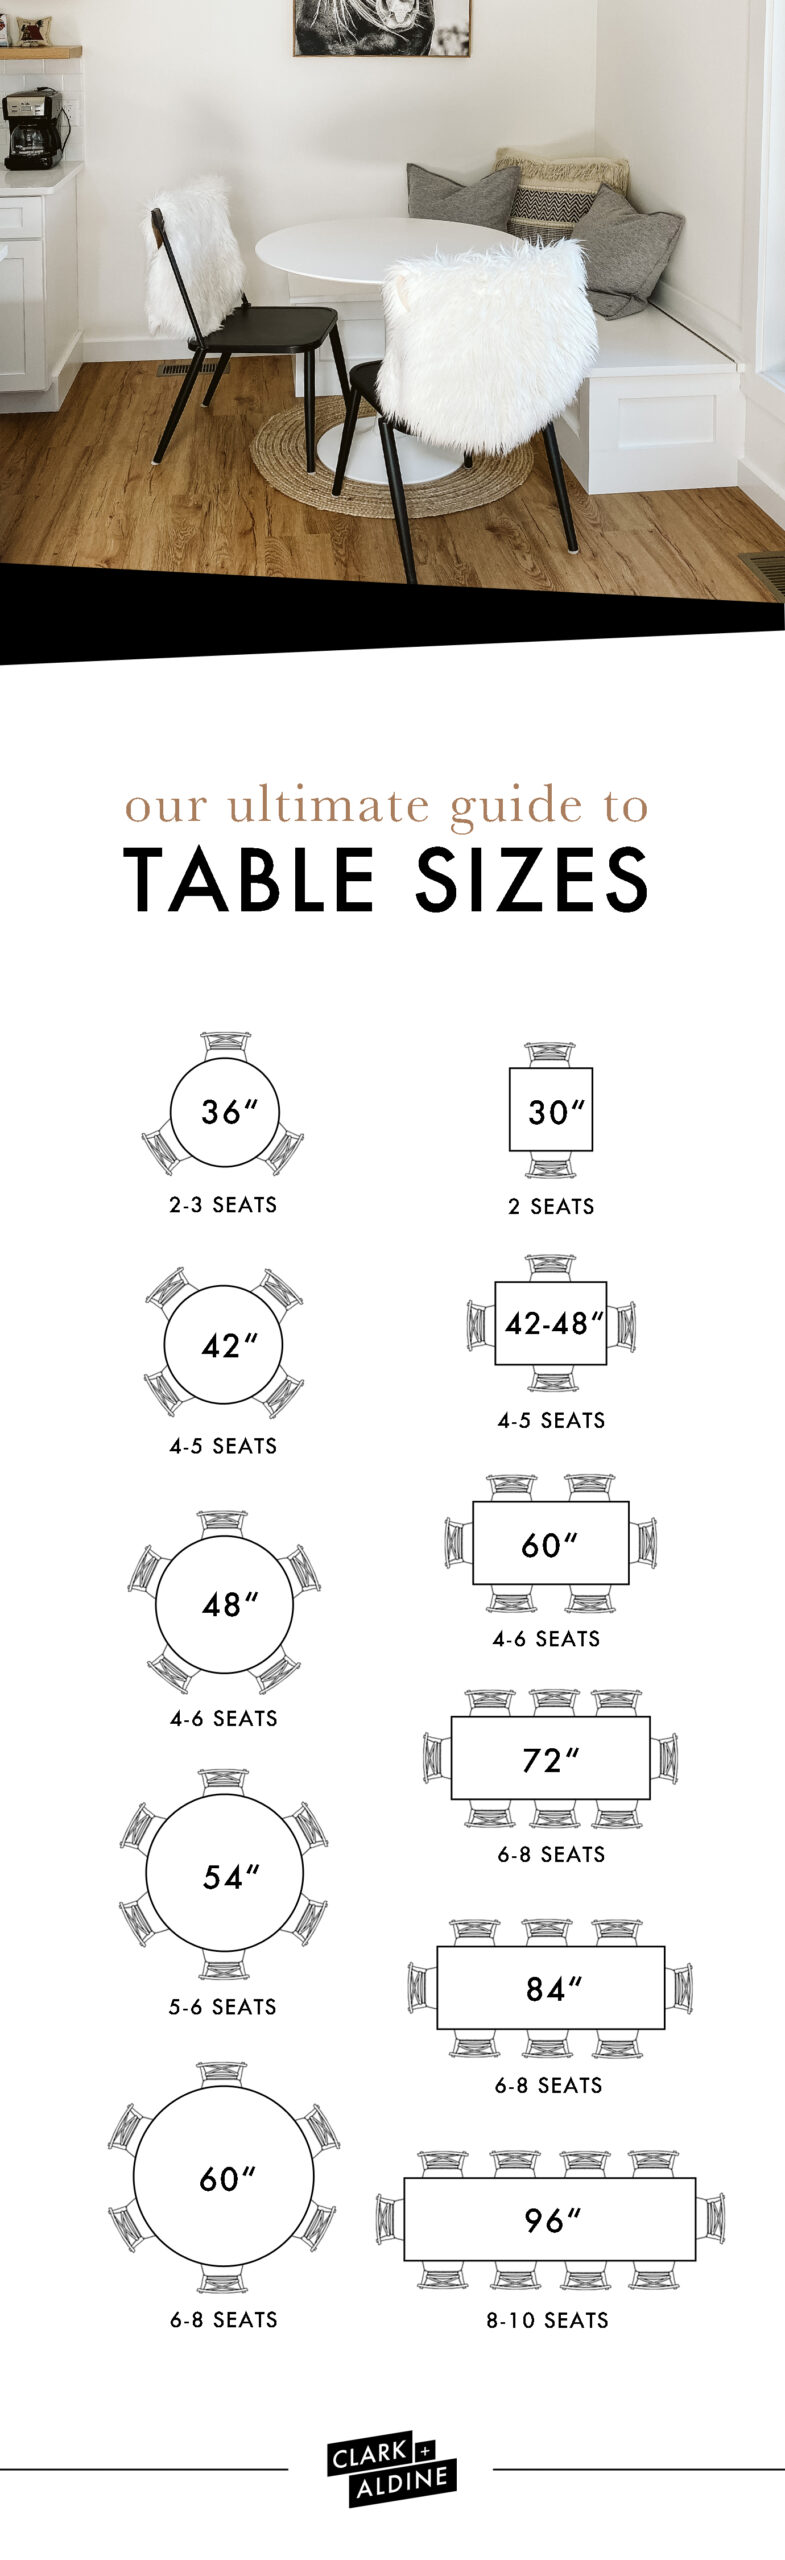 HOW TO PICK THE RIGHT TABLE FOR YOUR SPACE image 1